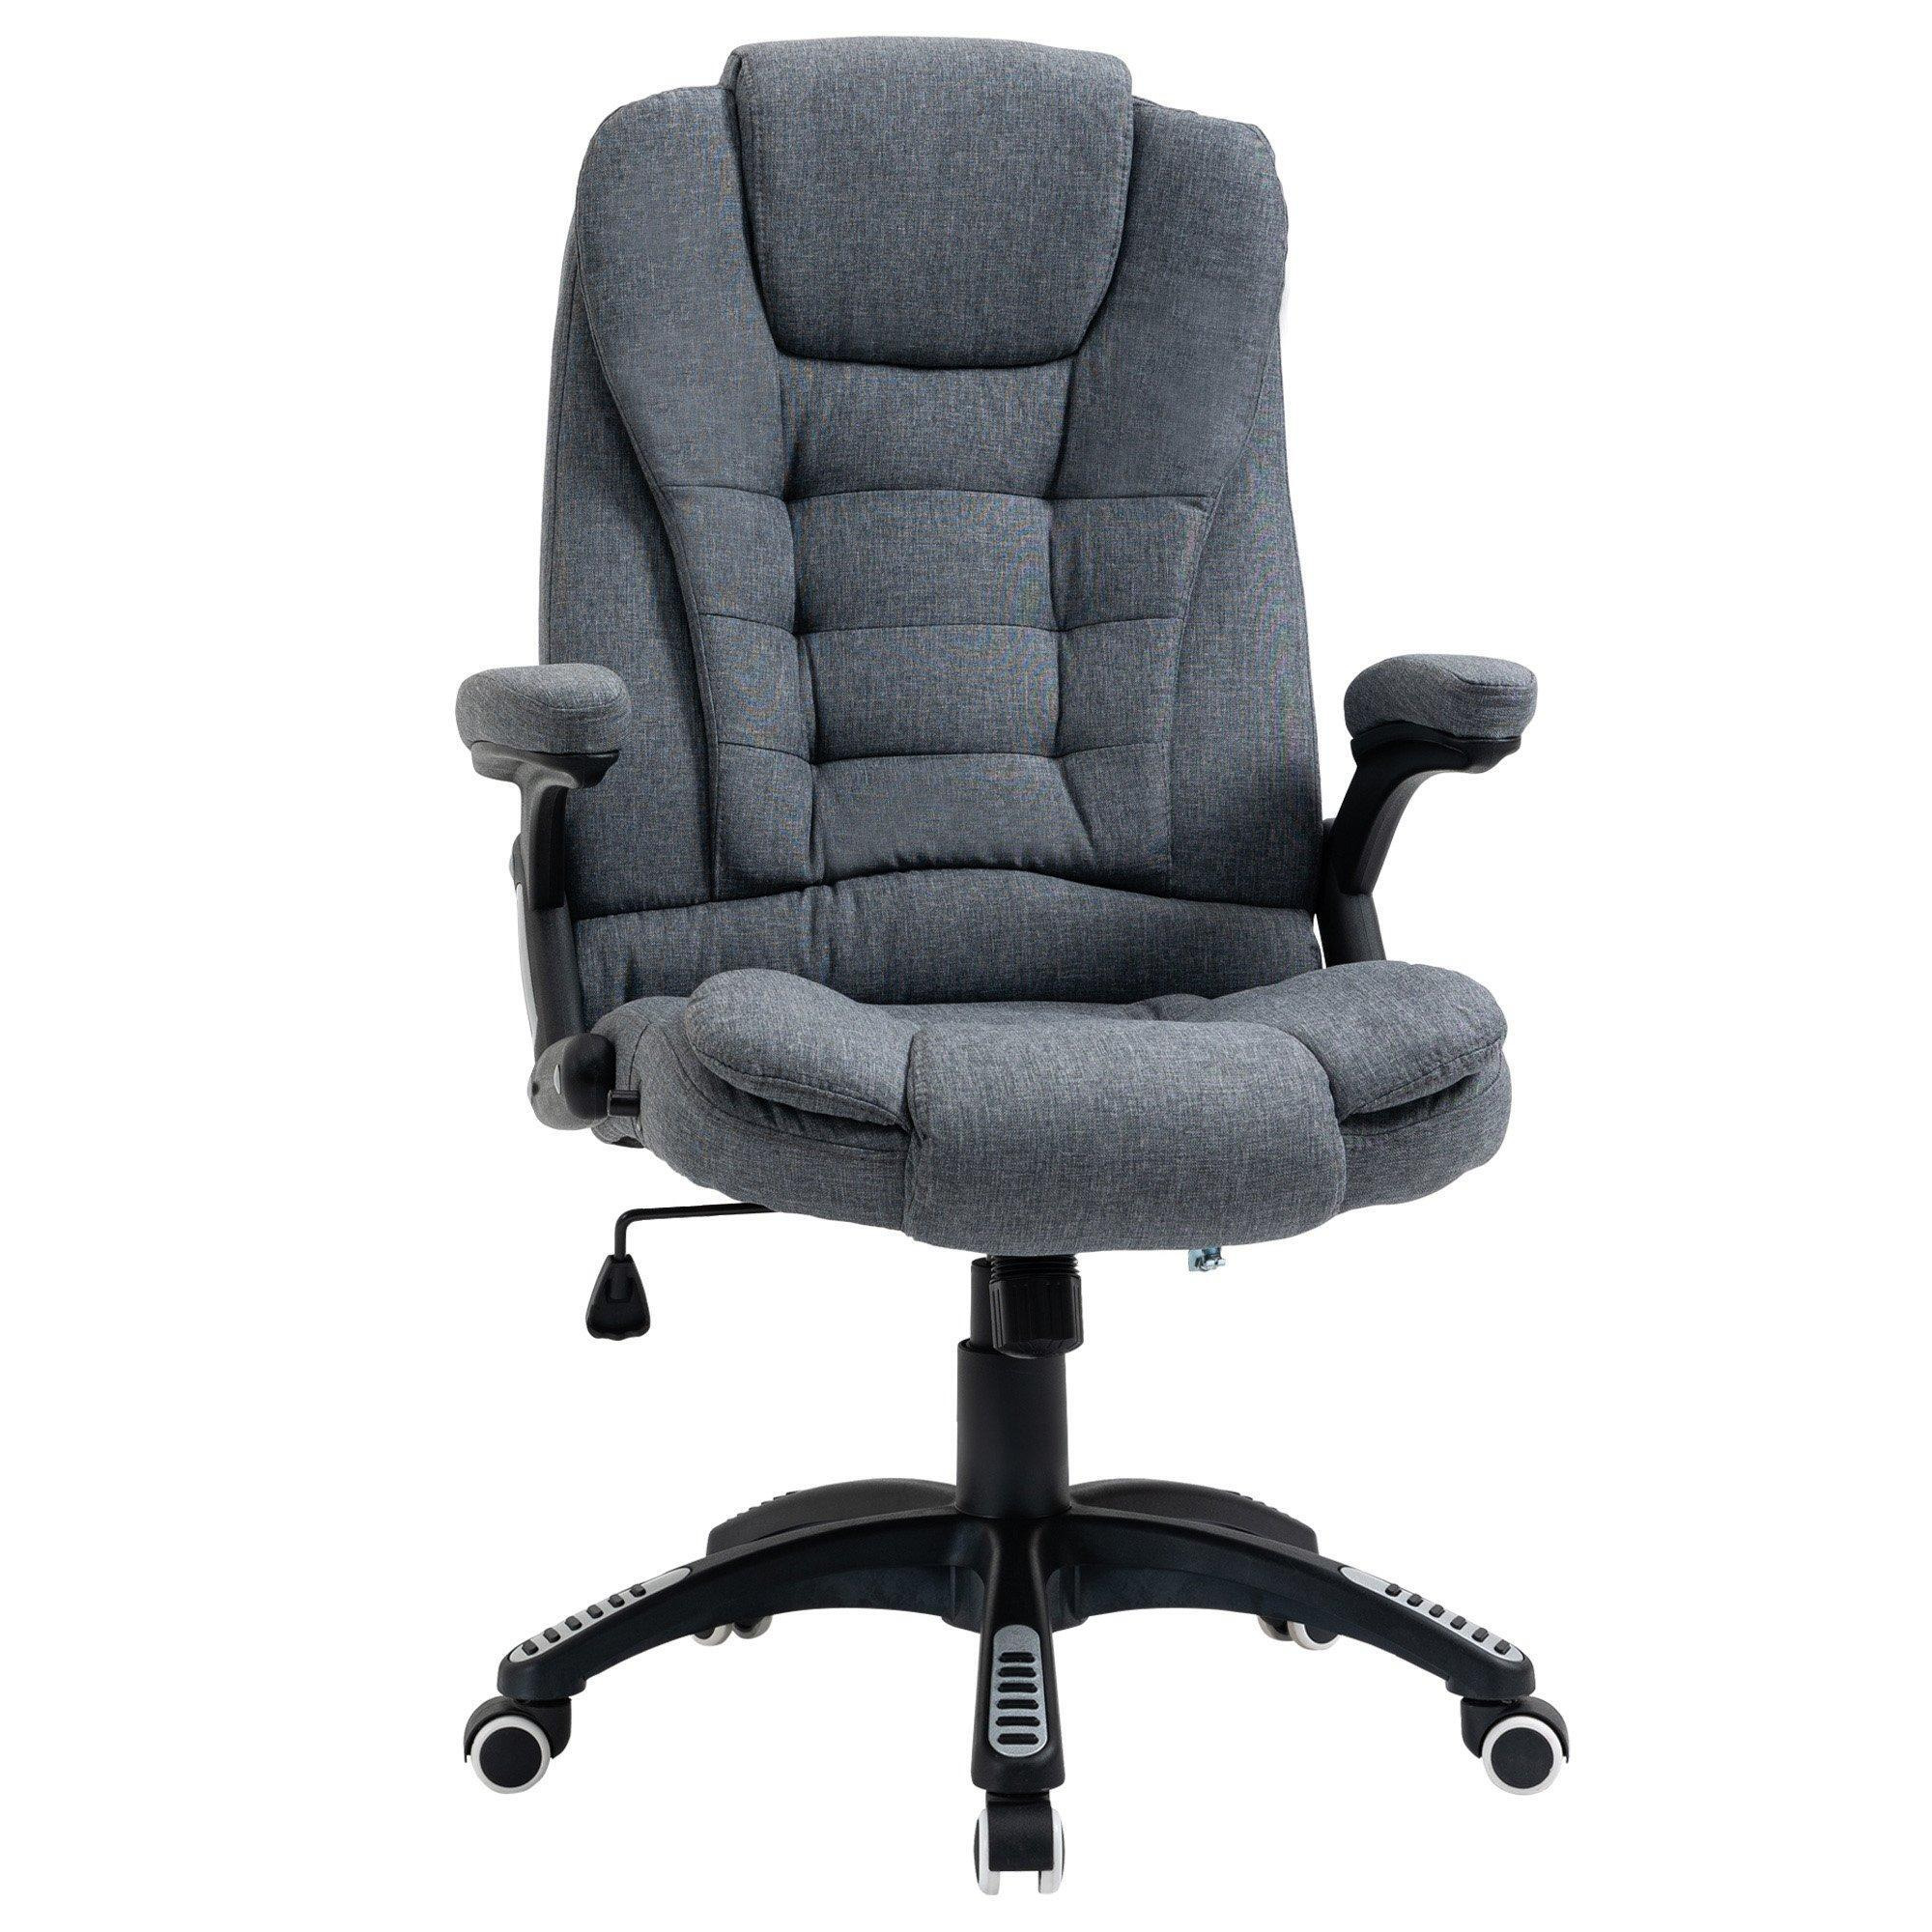 High Back Home Office Chair Computer Desk Chair with Arms Swivel Wheels - image 1